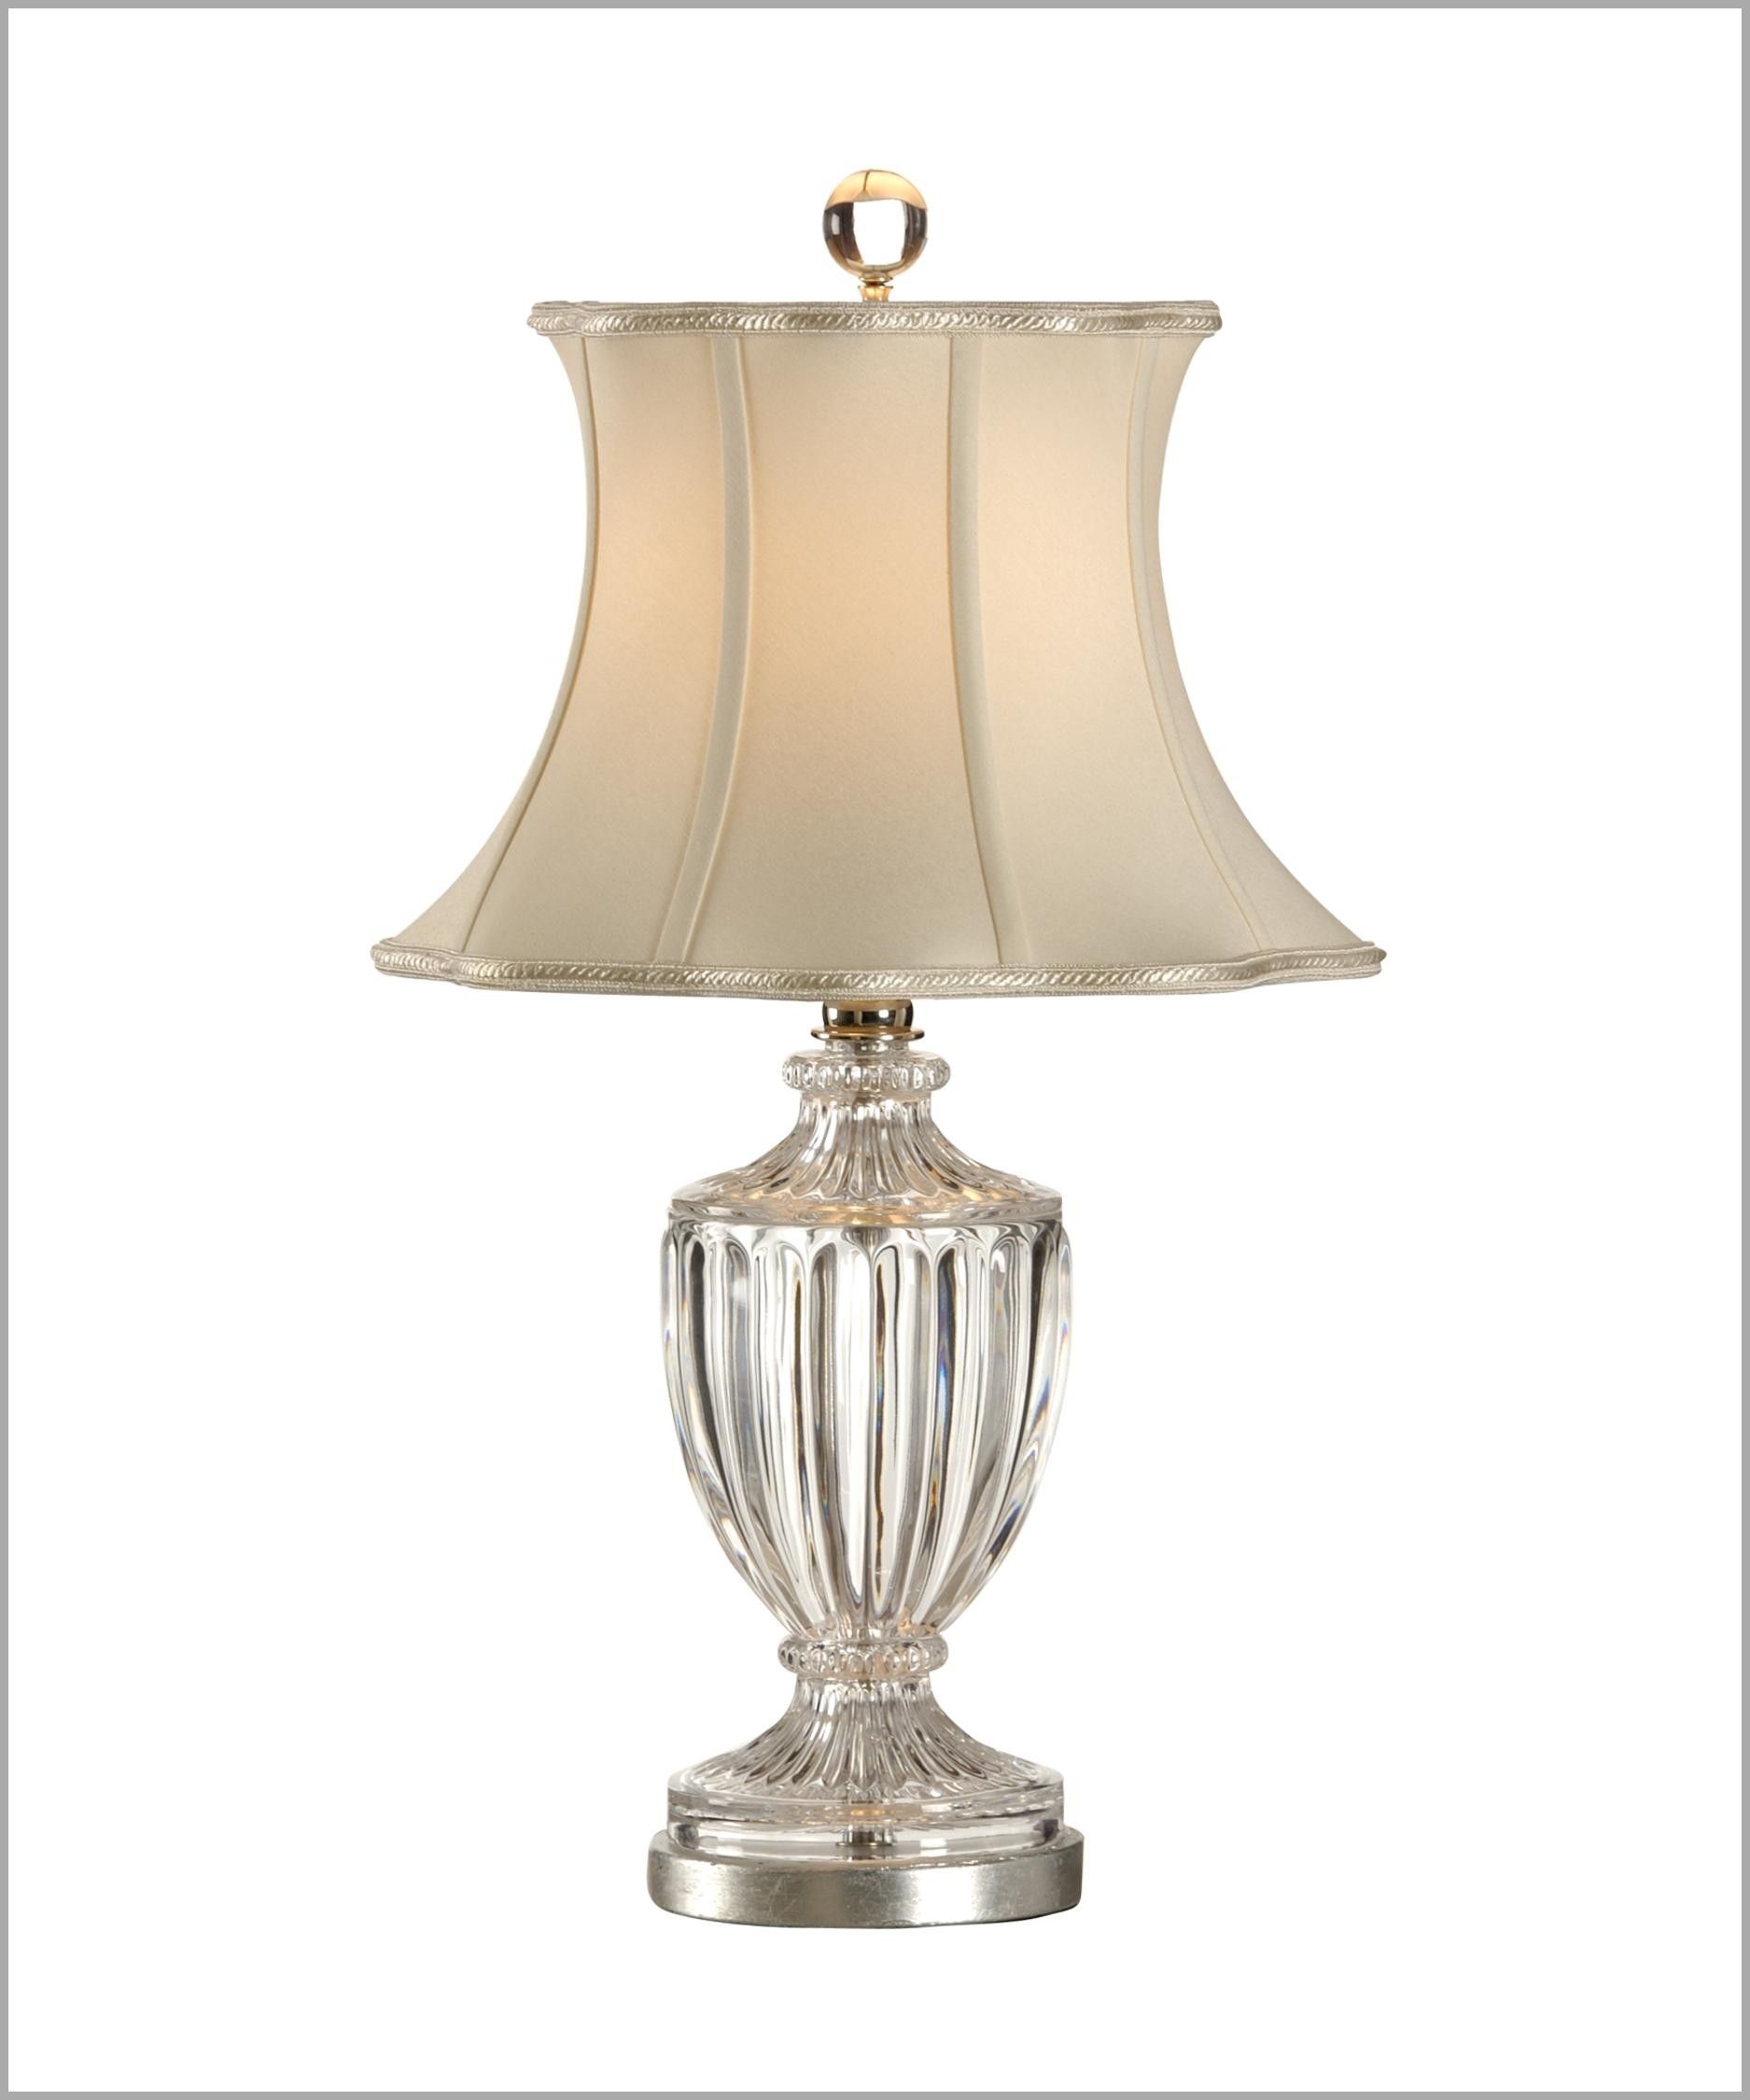 68 Most Magic Small Accent Lamps Table Top Touch Bedside For Living In Living Room Table Top Lamps (View 12 of 15)